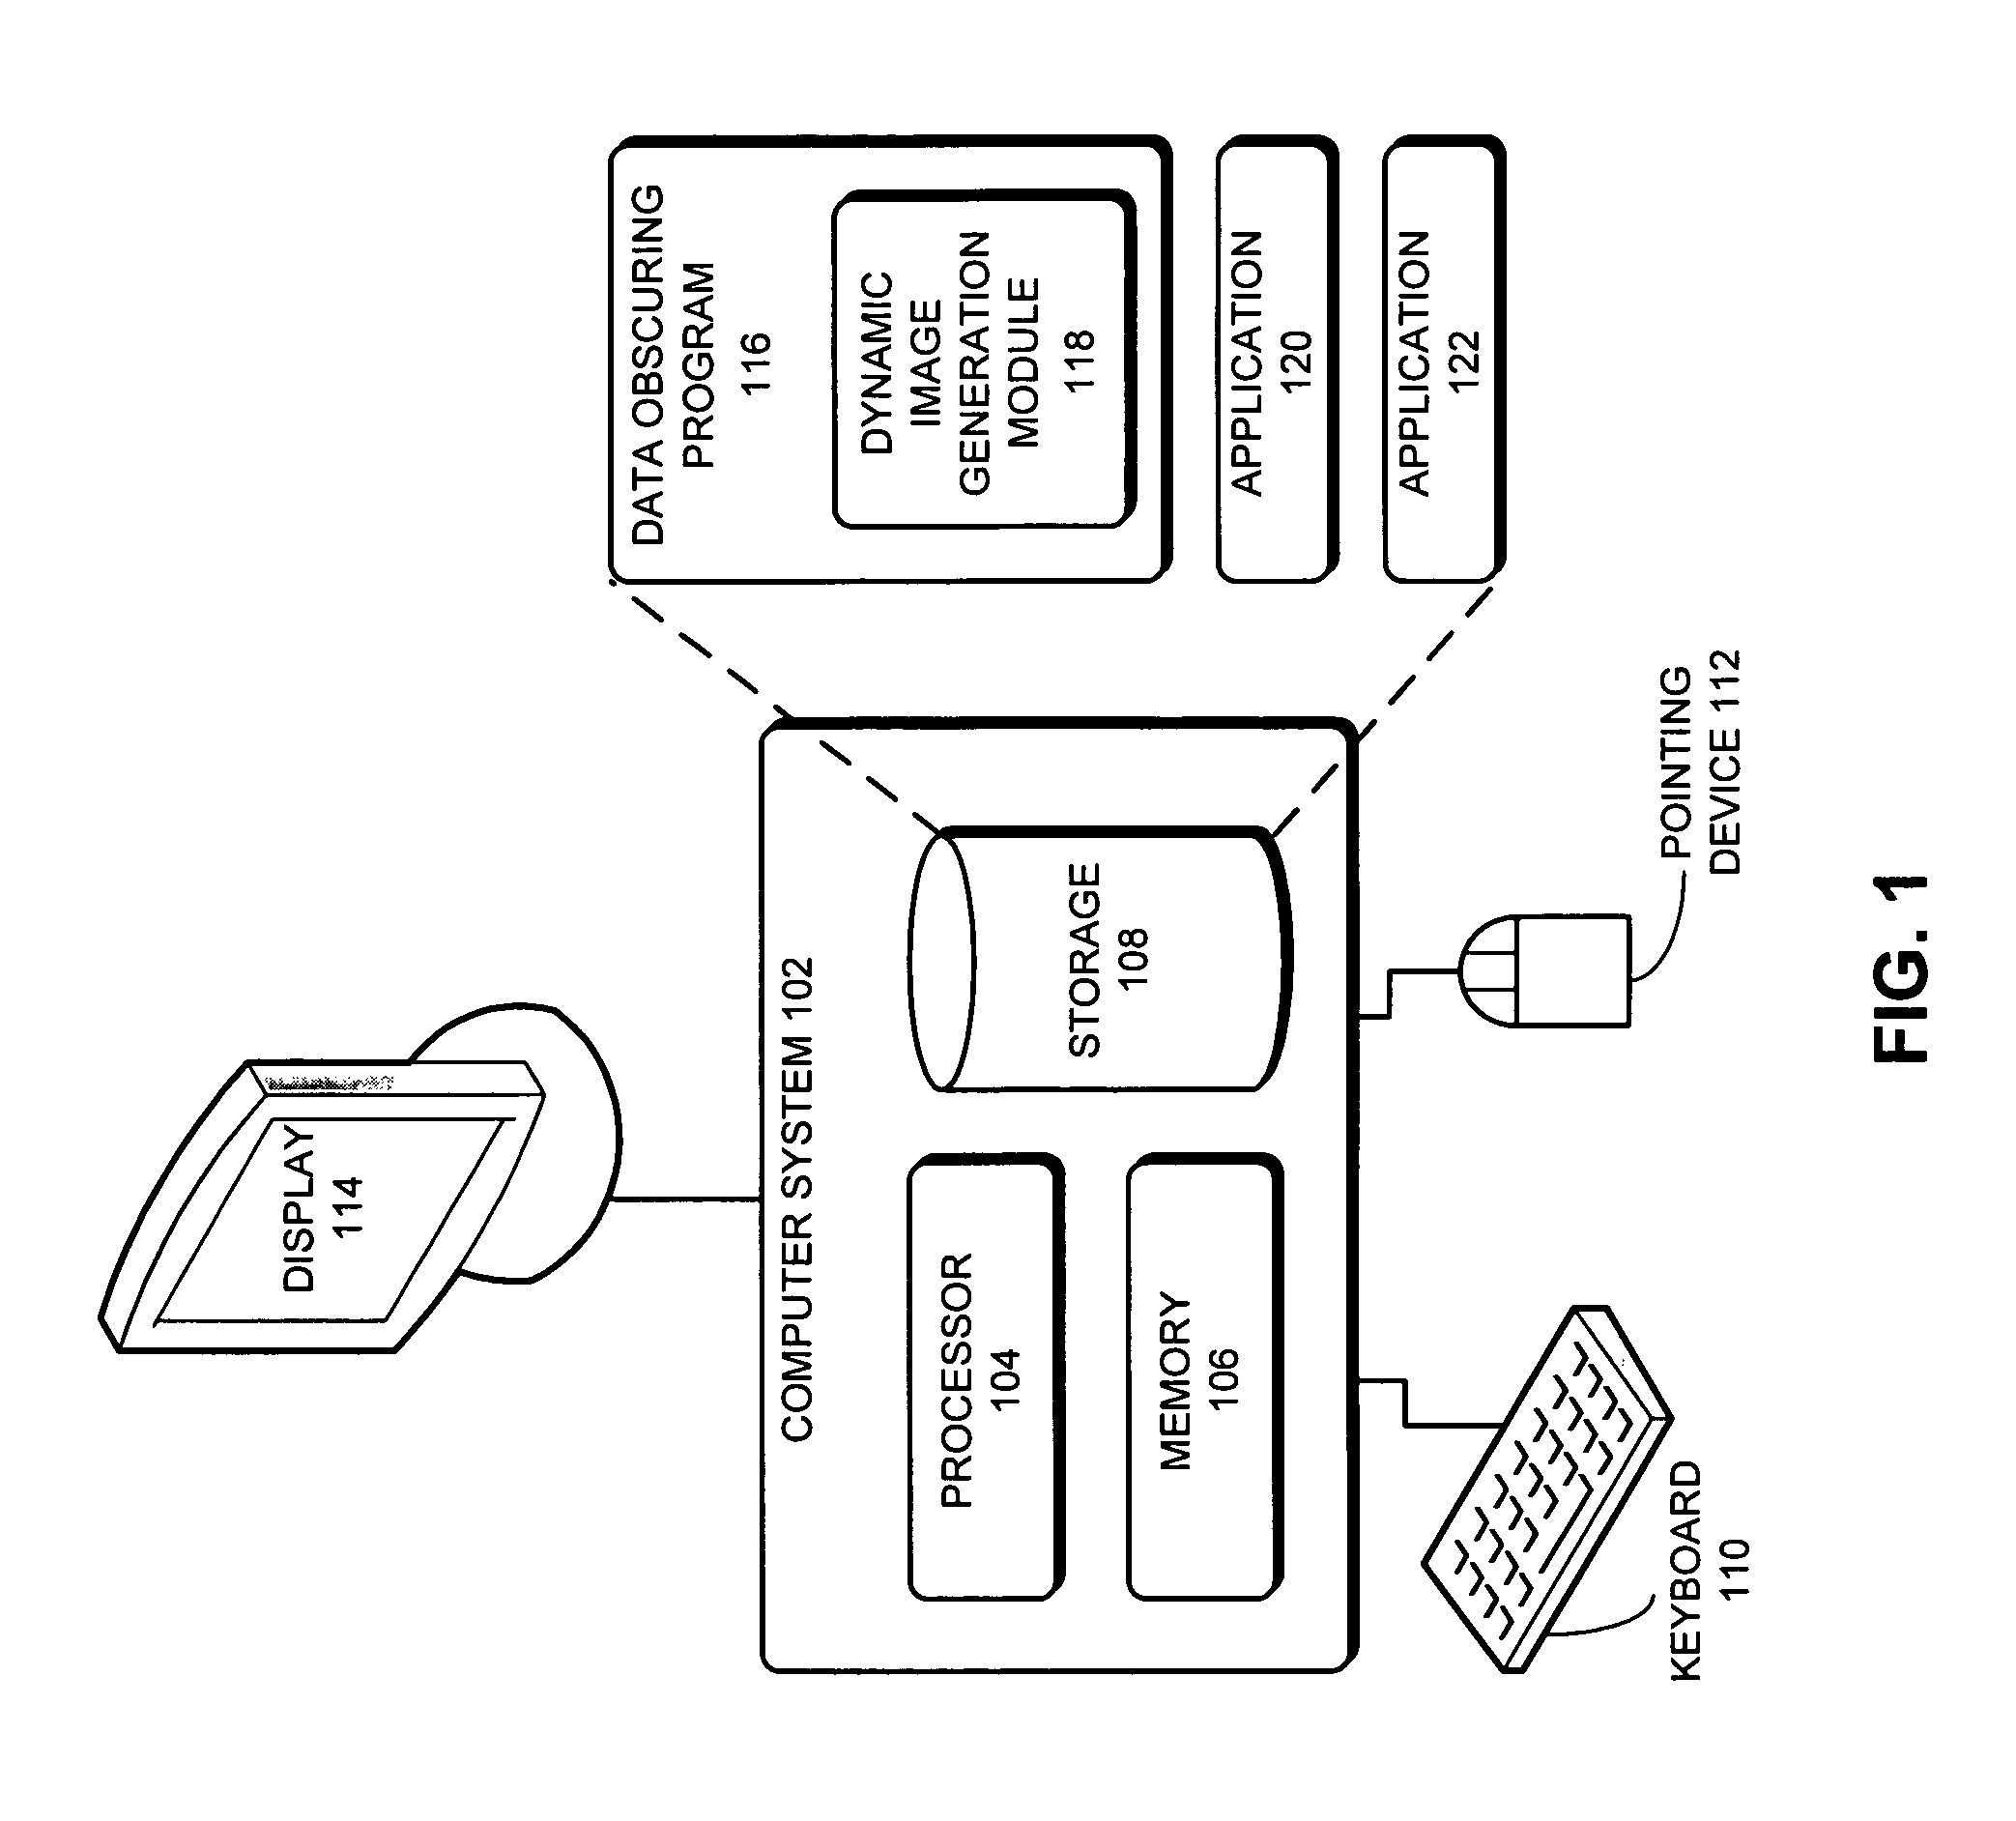 Method and system for obscuring and securing financial data in an online banking application